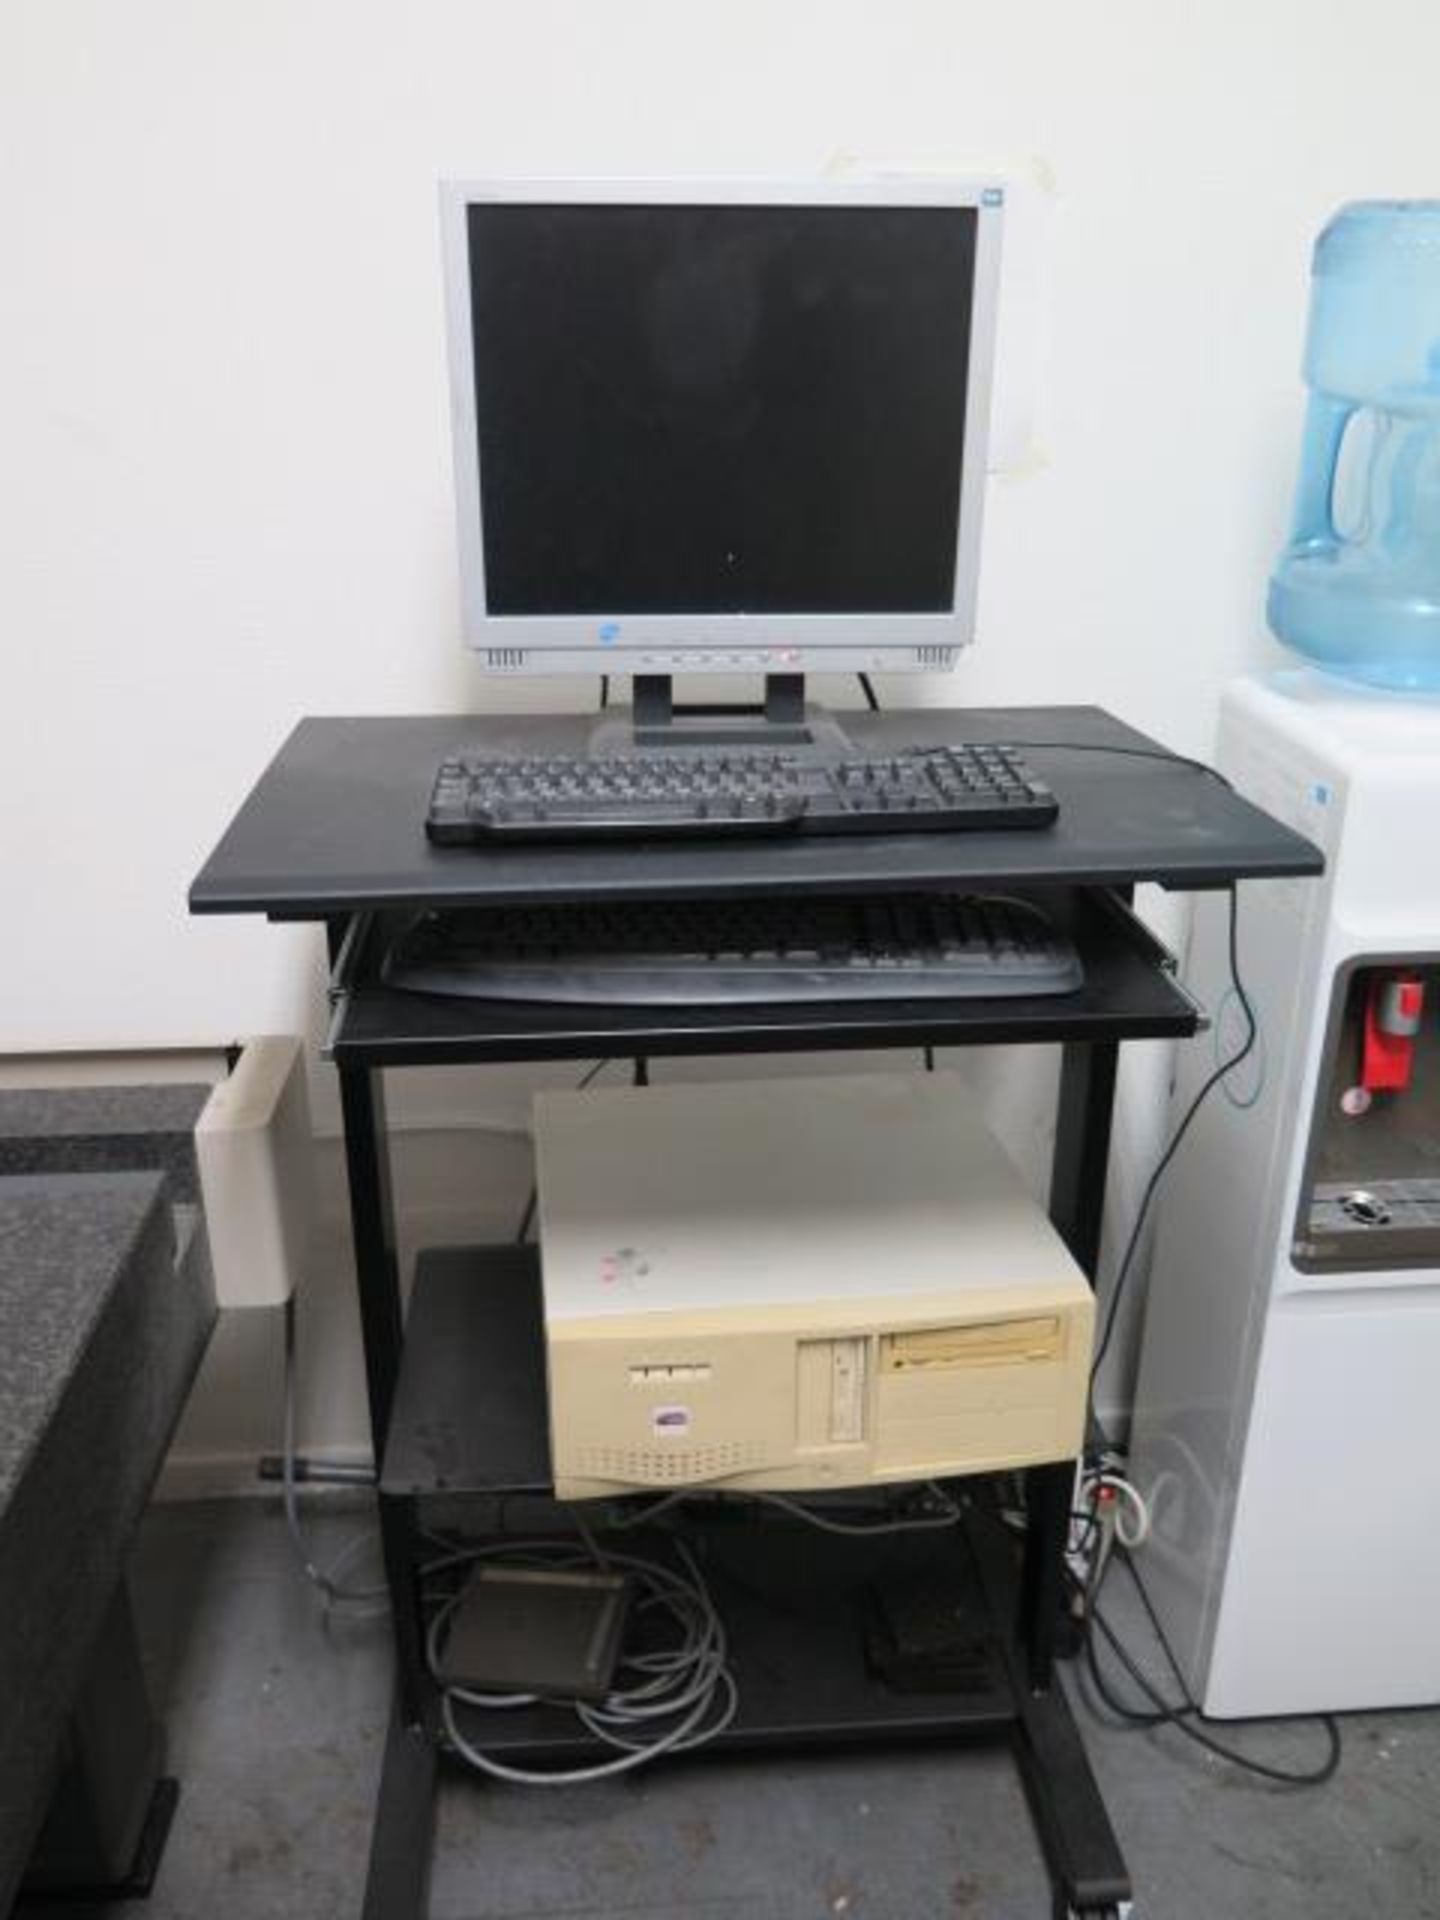 Mitutoyo BH706 CMM Machine s/n 0393507-004107111 w/ Renishaw PH-1 Probe, QC5000 Software, SOLD AS IS - Image 14 of 14